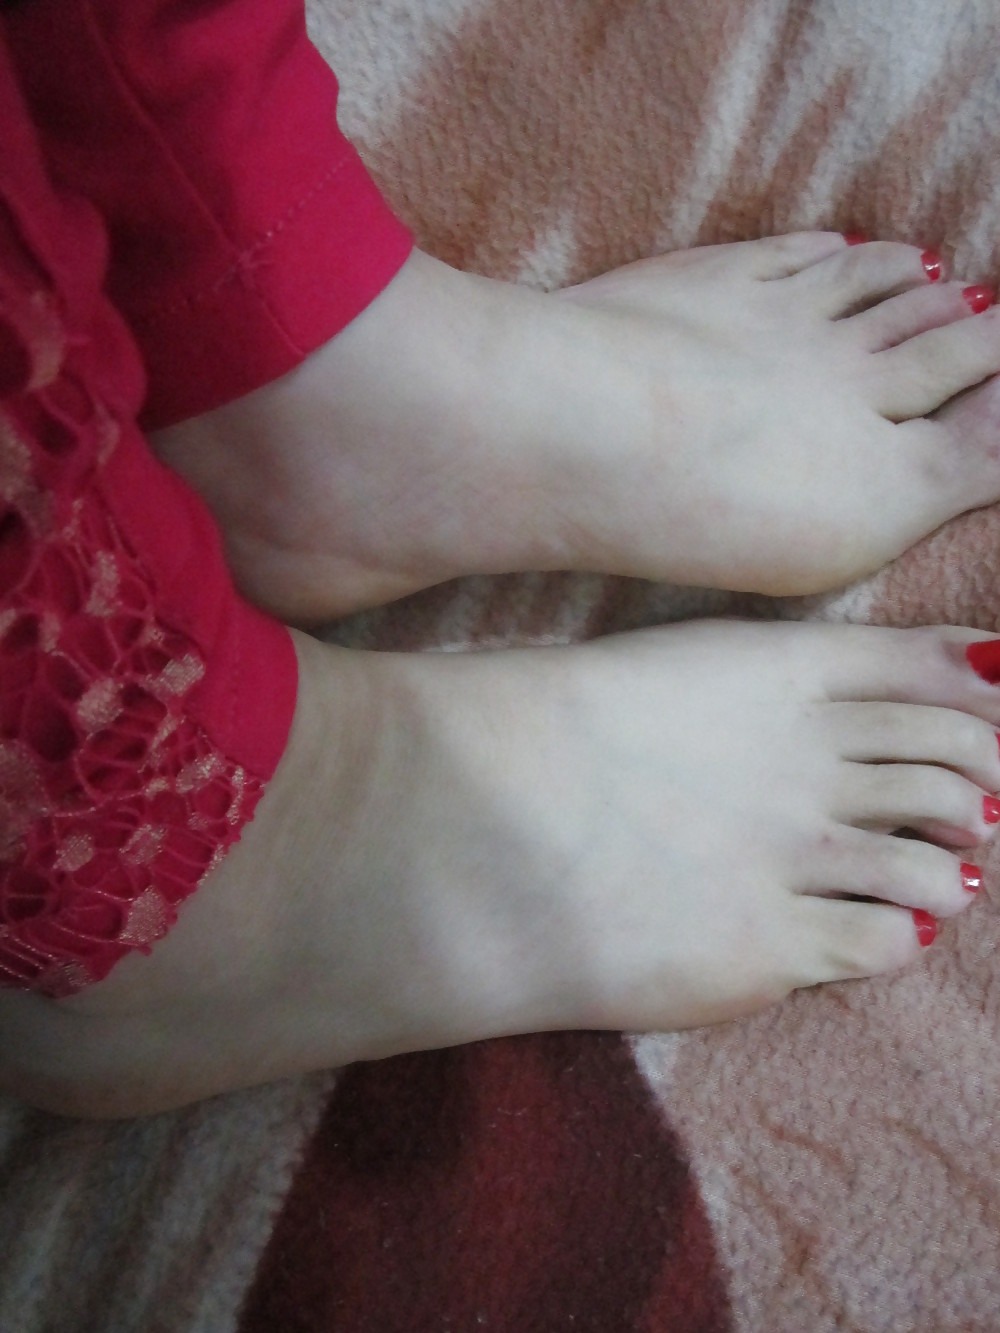 (1) My asian GF's feet, toes and soles! Chinese foot fetish!